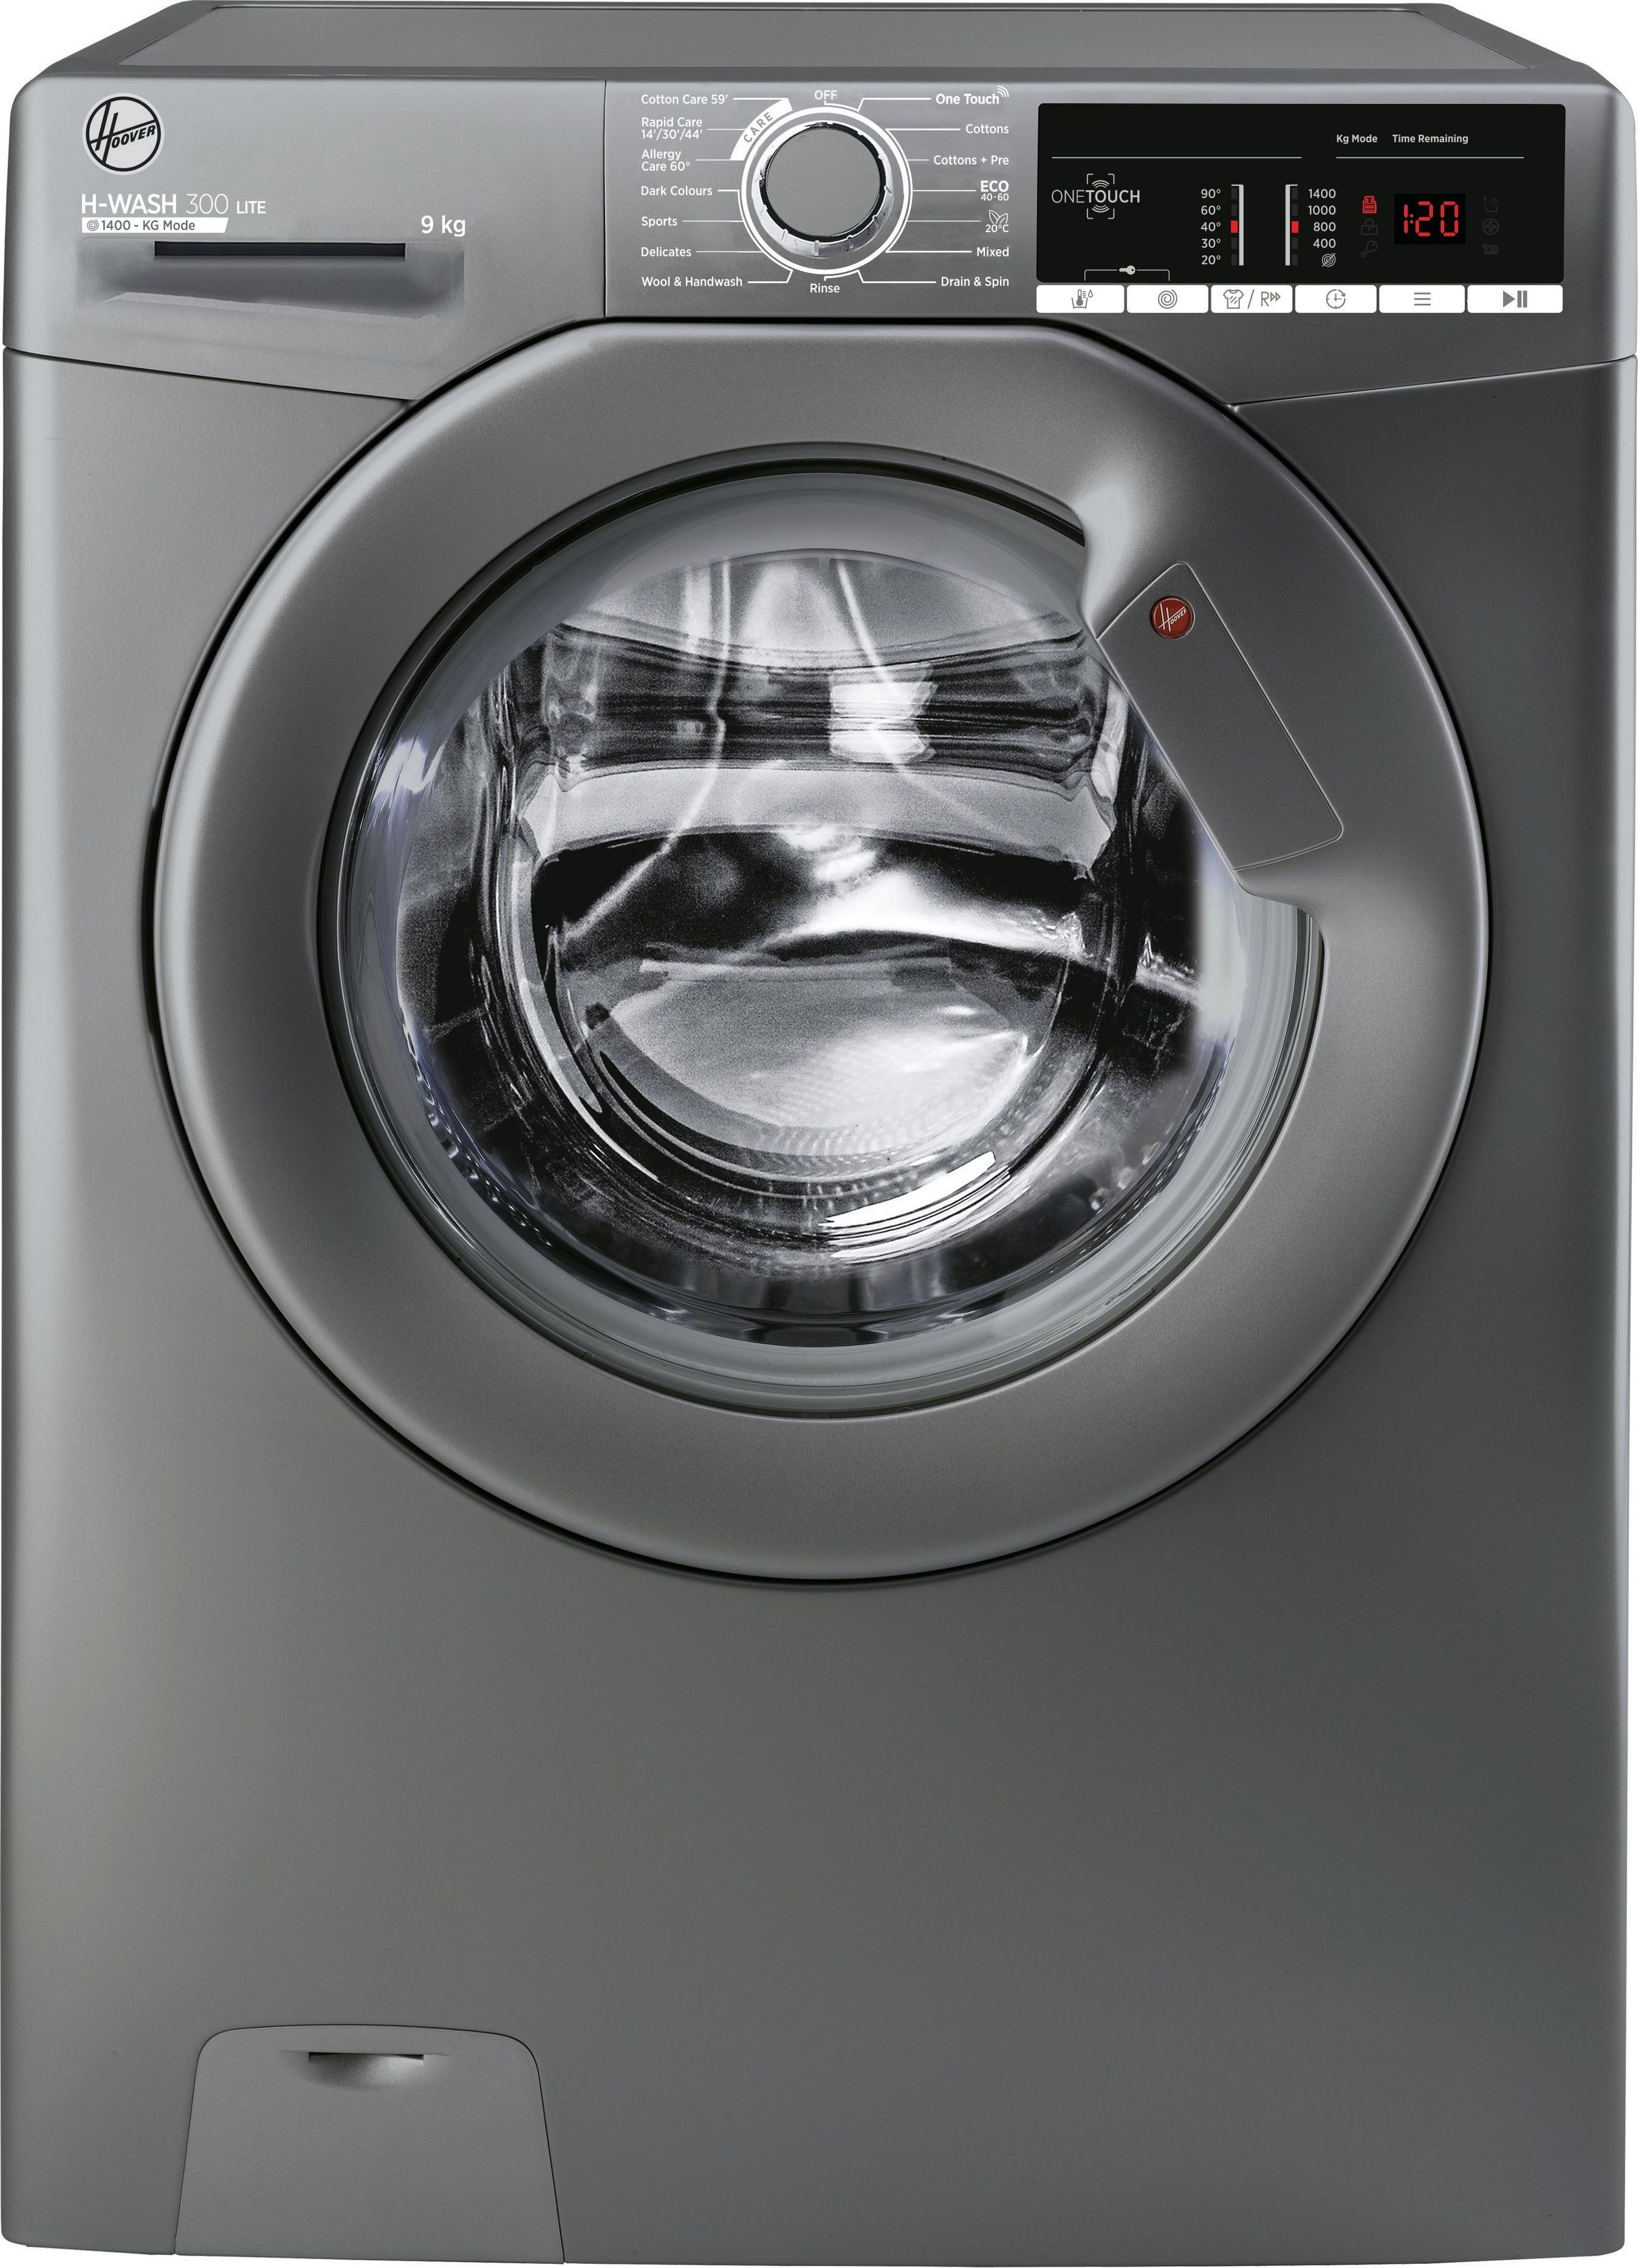 Hoover H-WASH 300 LITE H3W49TAGG4/1-80 9kg WiFi Connected Washing Machine with 1400 rpm - Graphite - B Rated, Silver